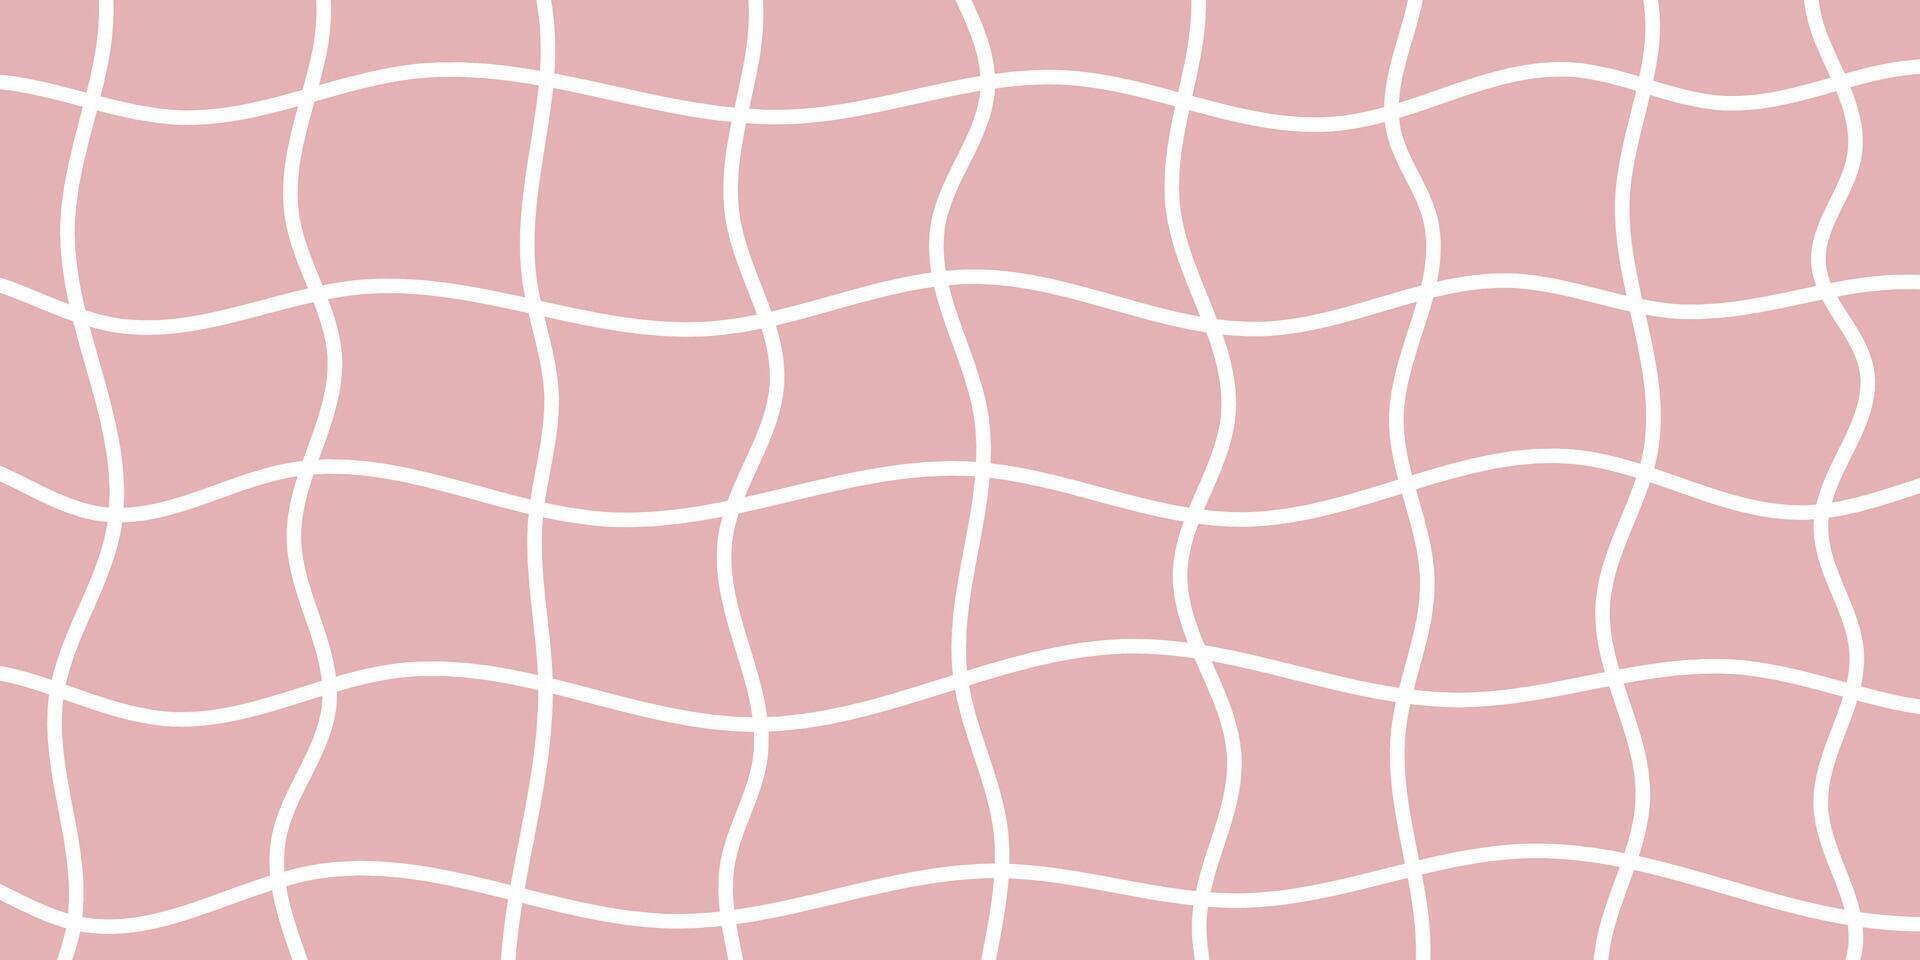 Groovy Checkerboard Pattern, Psychedelic Abstract Grid Background of 1970s Retro Style. Ideal for Web Design, and Social Media. Featuring Pink and White Colors. vector